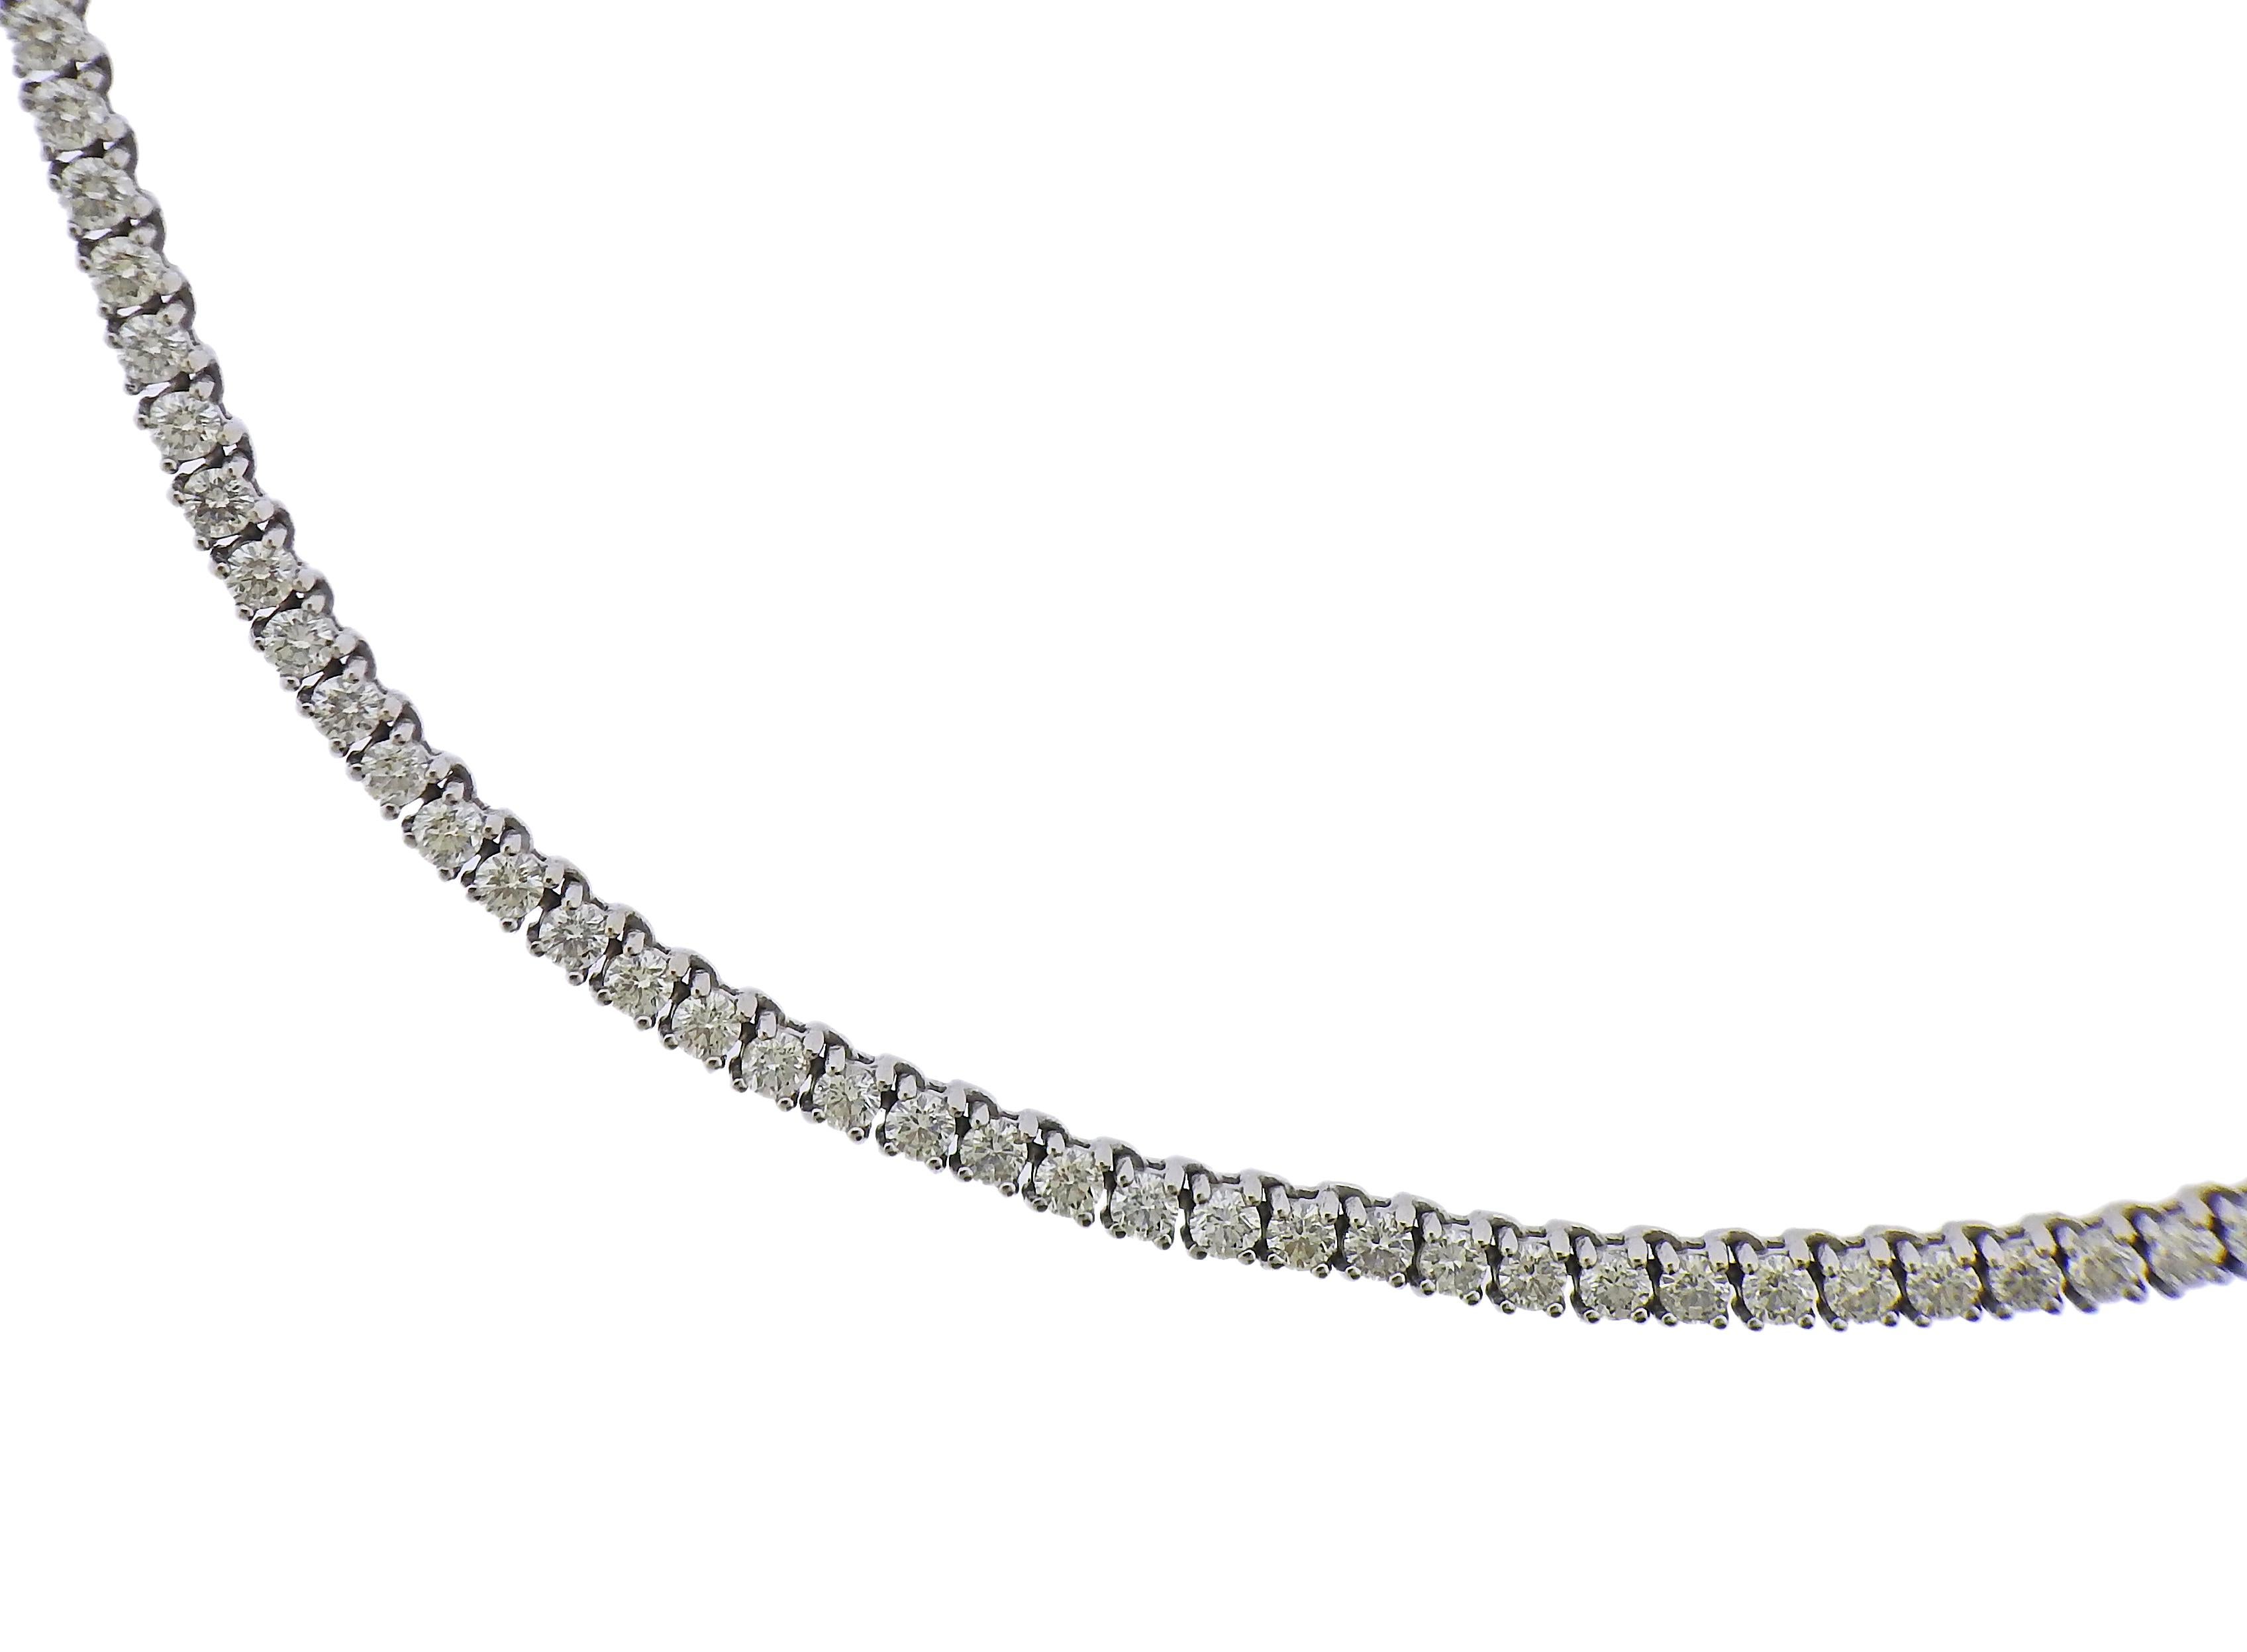 Classic Riviere necklace in 14k gold, with 141 diamonds - approx. 11.28ctw. Necklace is 18.5